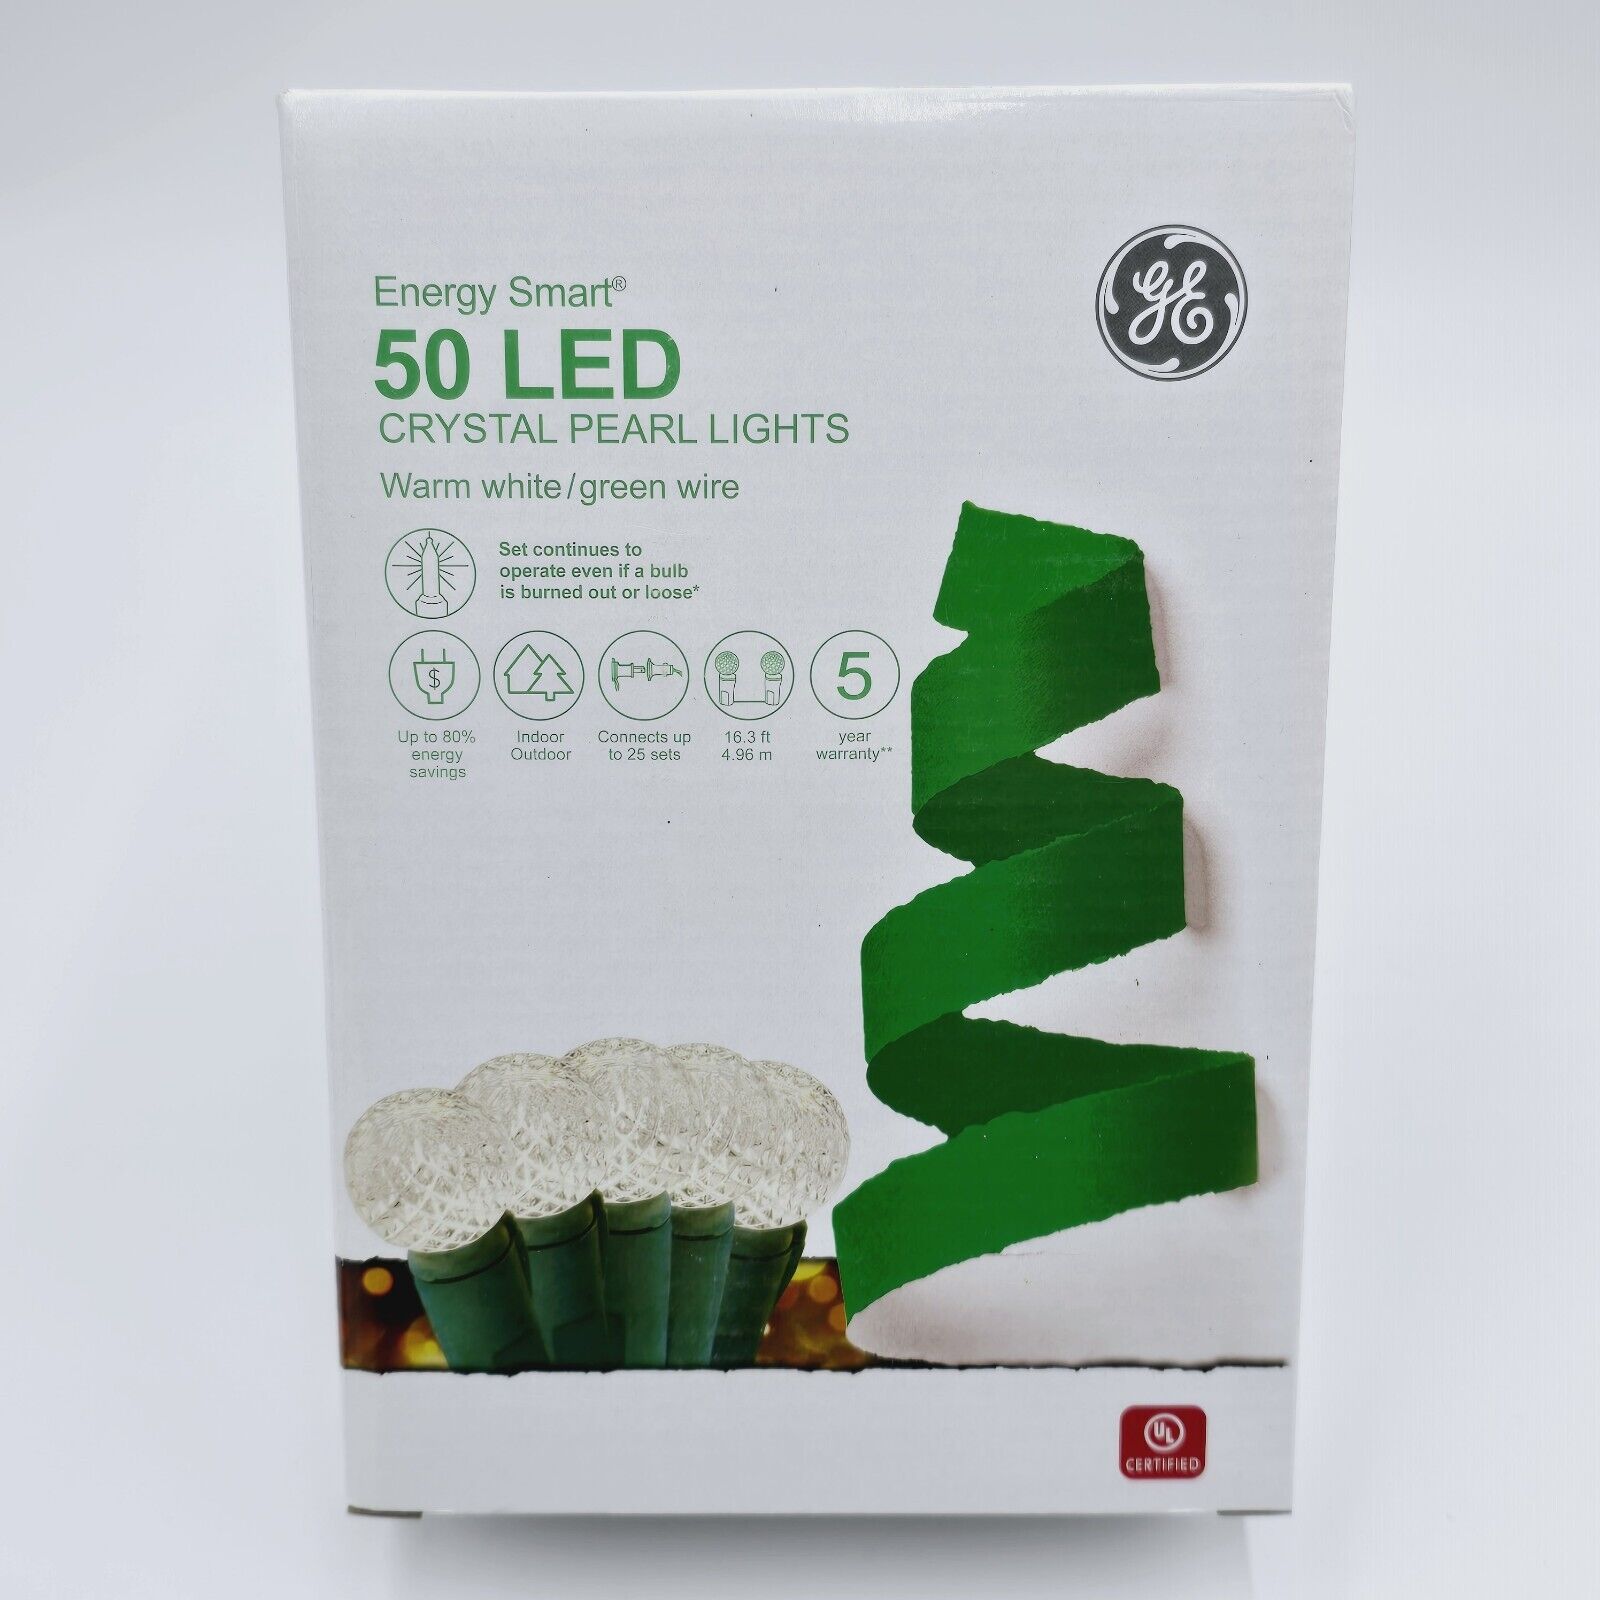 NEW GE Energy Smart 50 LED Crystal PEARL String Lights White with Green Wire